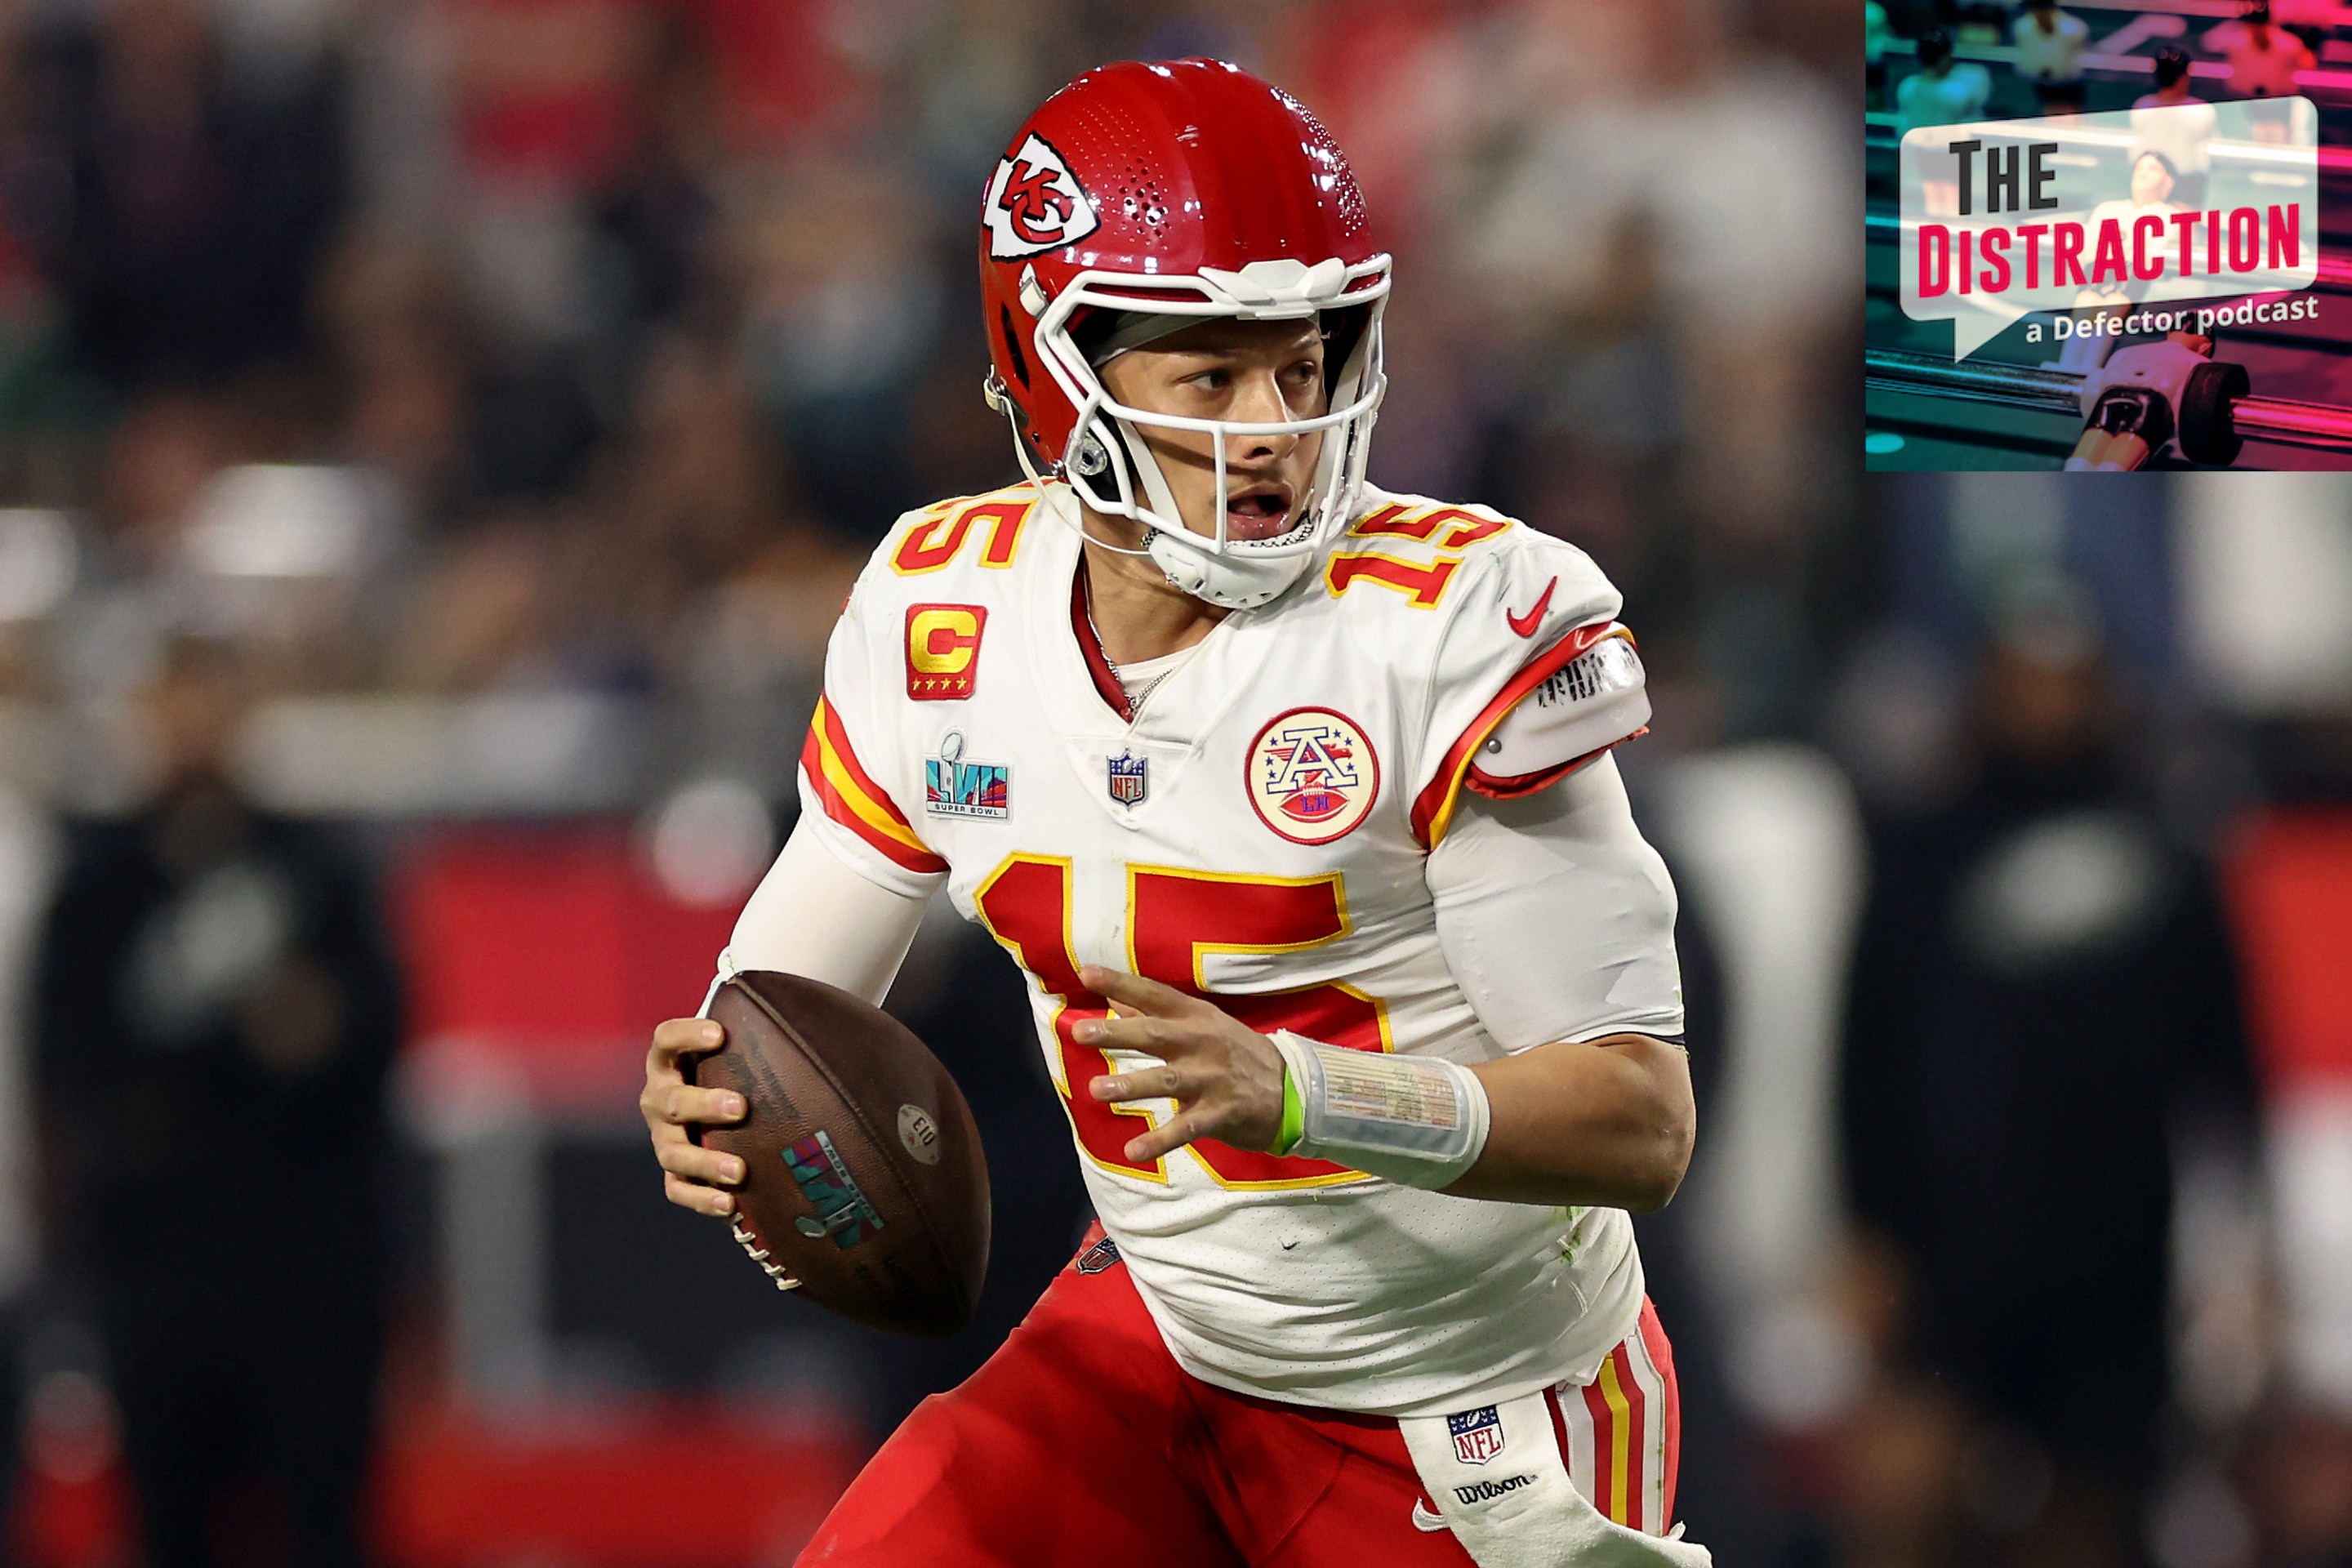 Patrick Mahomes about to complete a pass while leading his team to (spoiler alert) a win in Super Bowl 57.